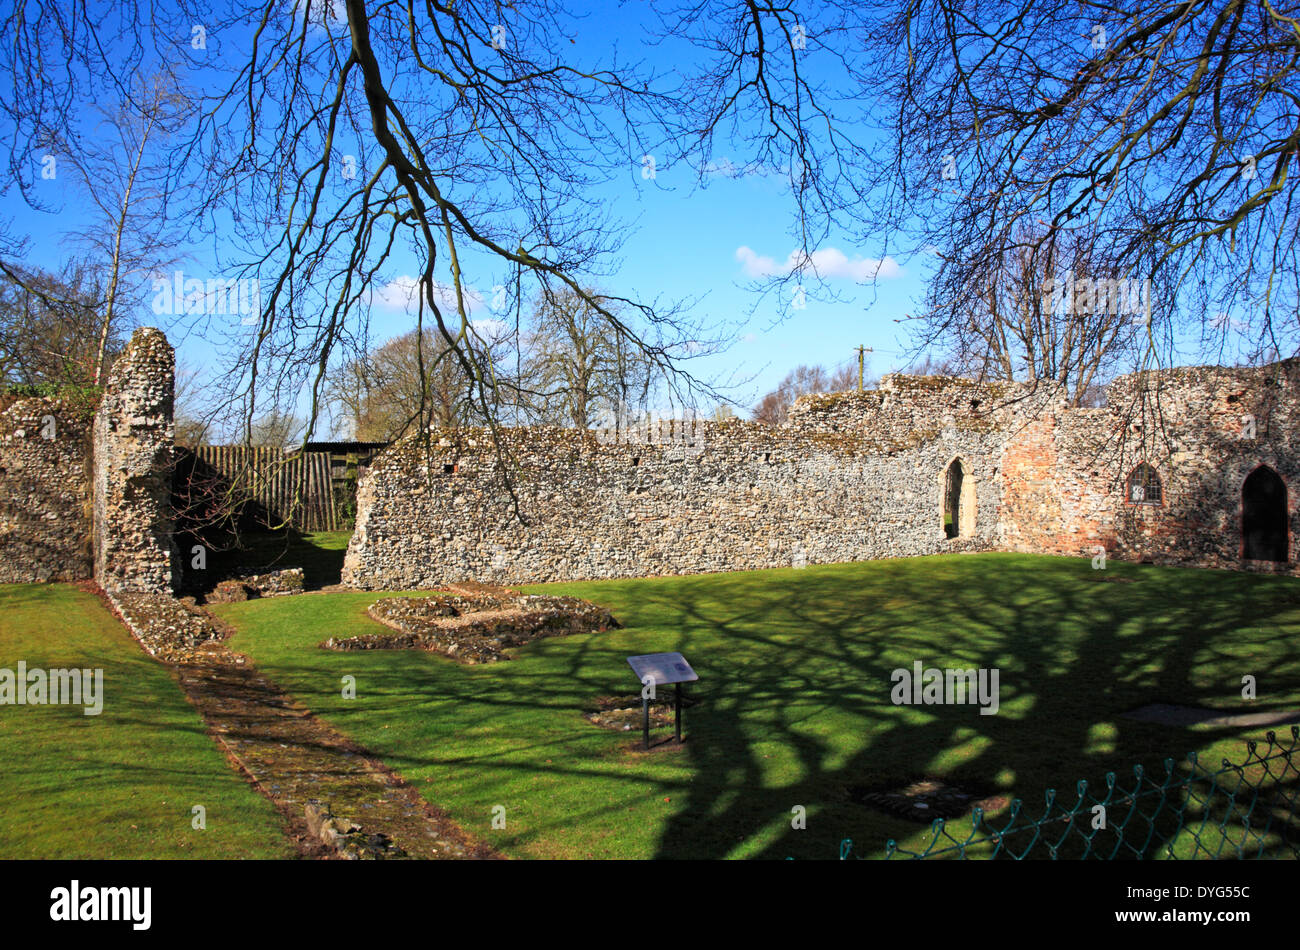 A view of the cloister wall ruins at St Olave's Priory, Norfolk, England, United Kingdom. Stock Photo